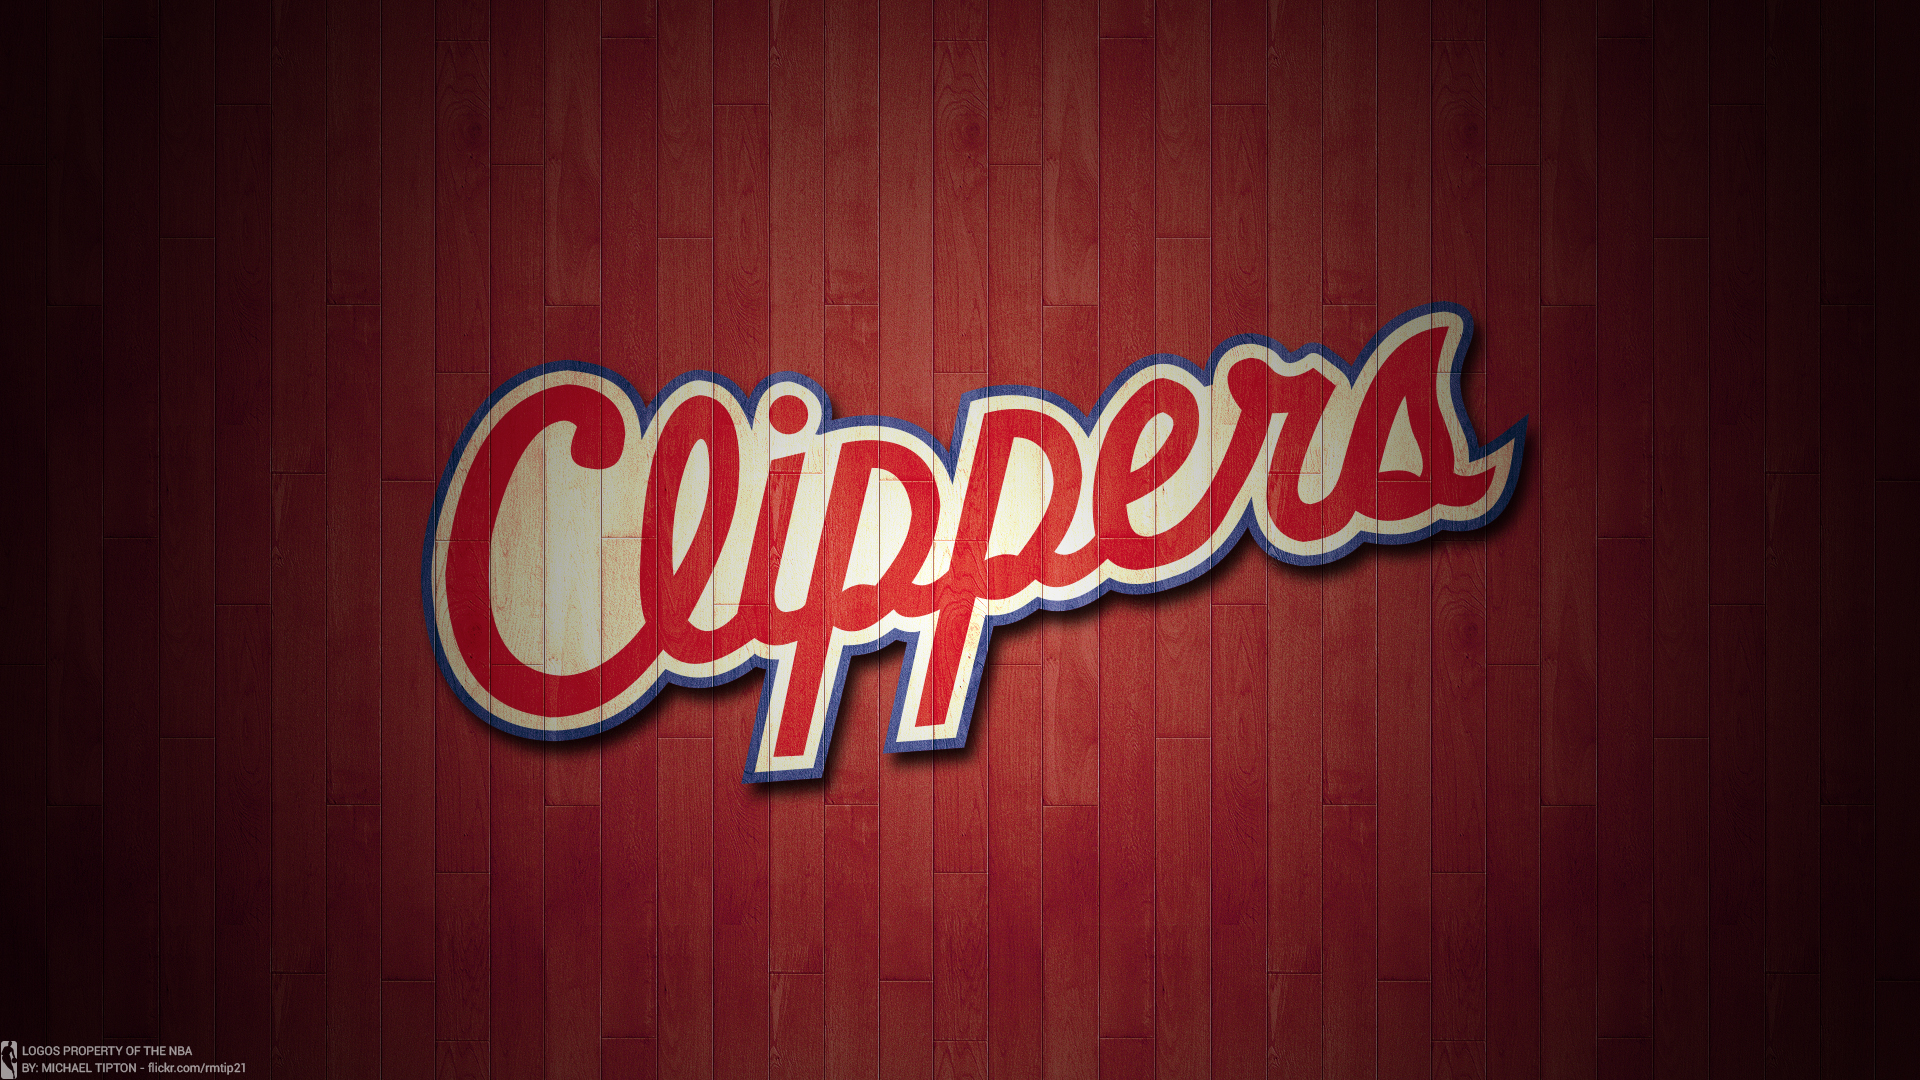 los, Angeles, Clippers, Basketball, Nba,  37 Wallpaper